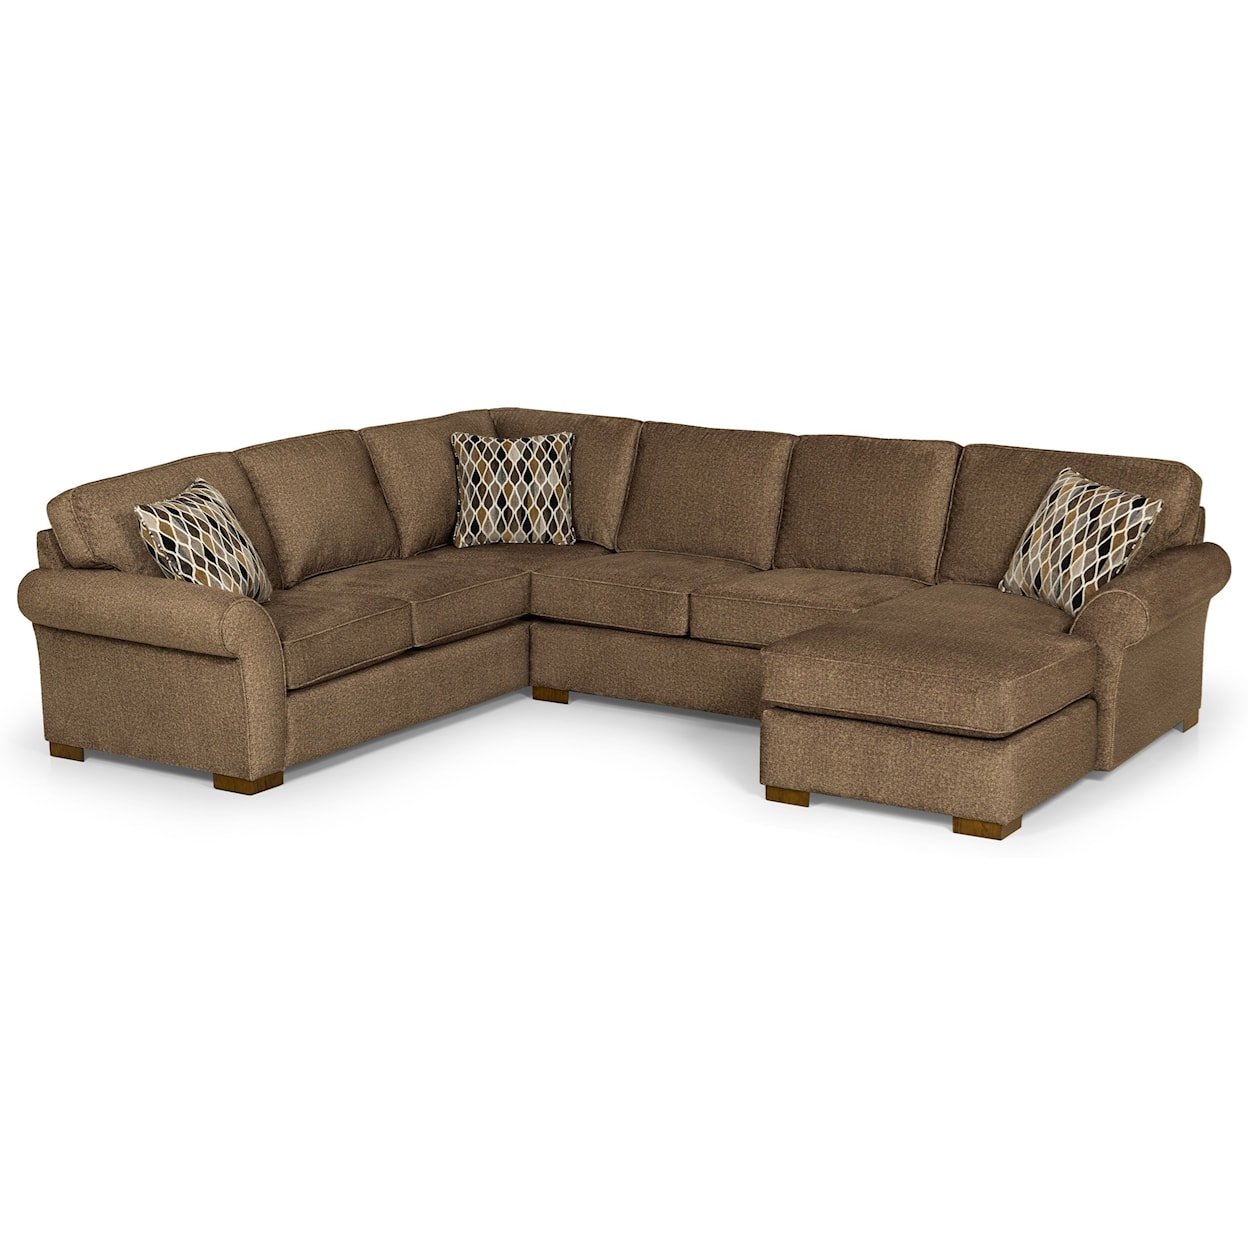 Sunset Home 29662 5-Seat Sectional Sofa w/ RAF Chaise